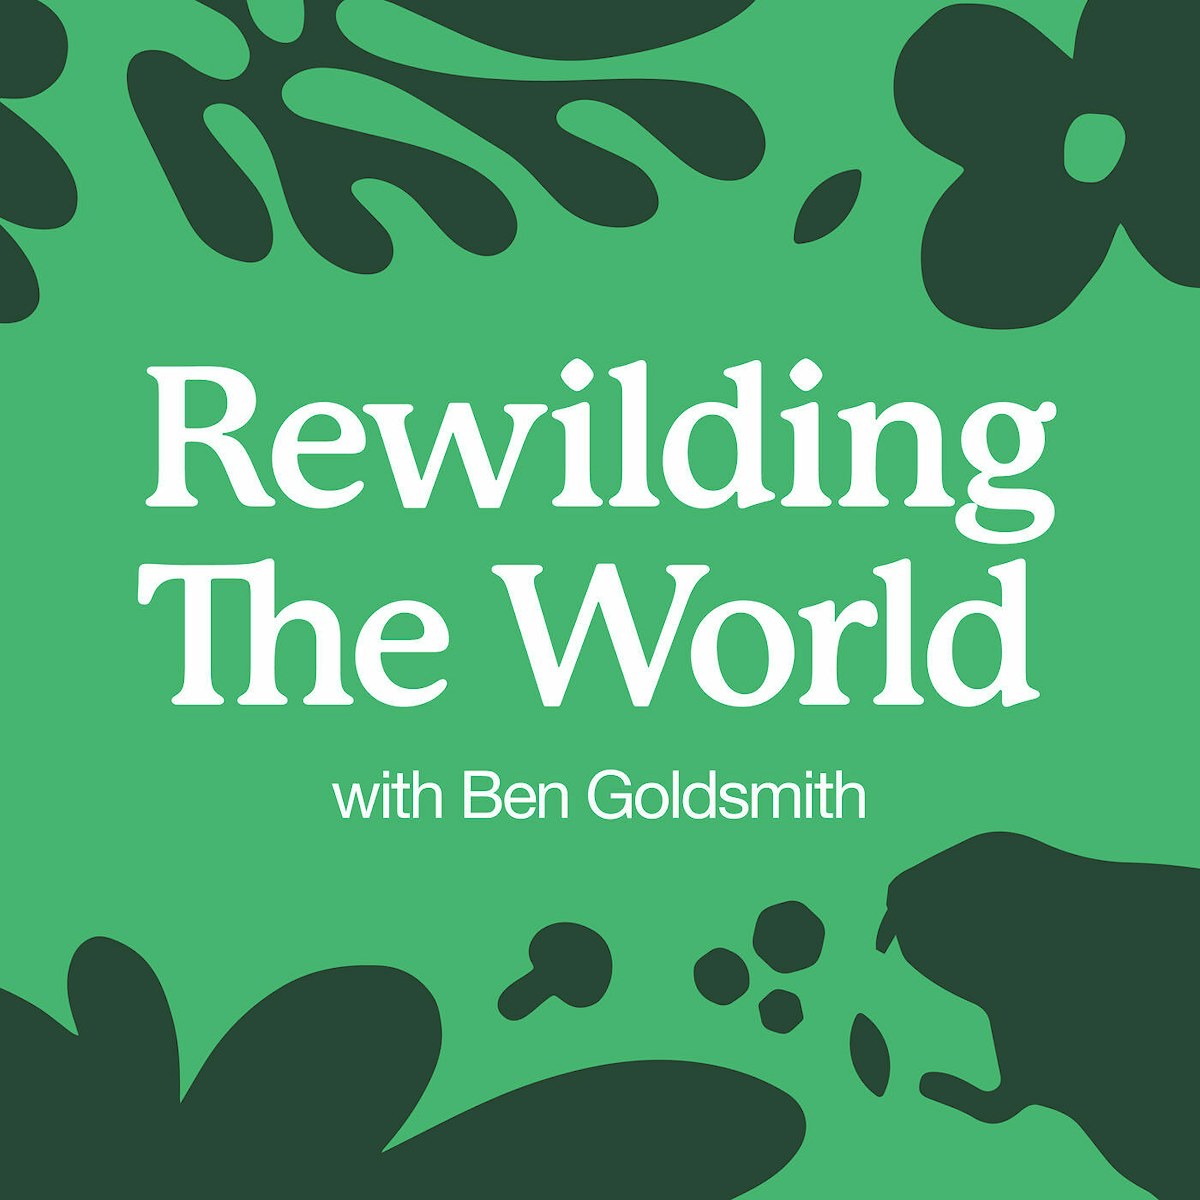 Green graphic with natural silhouettes and words "Rewilding the world"